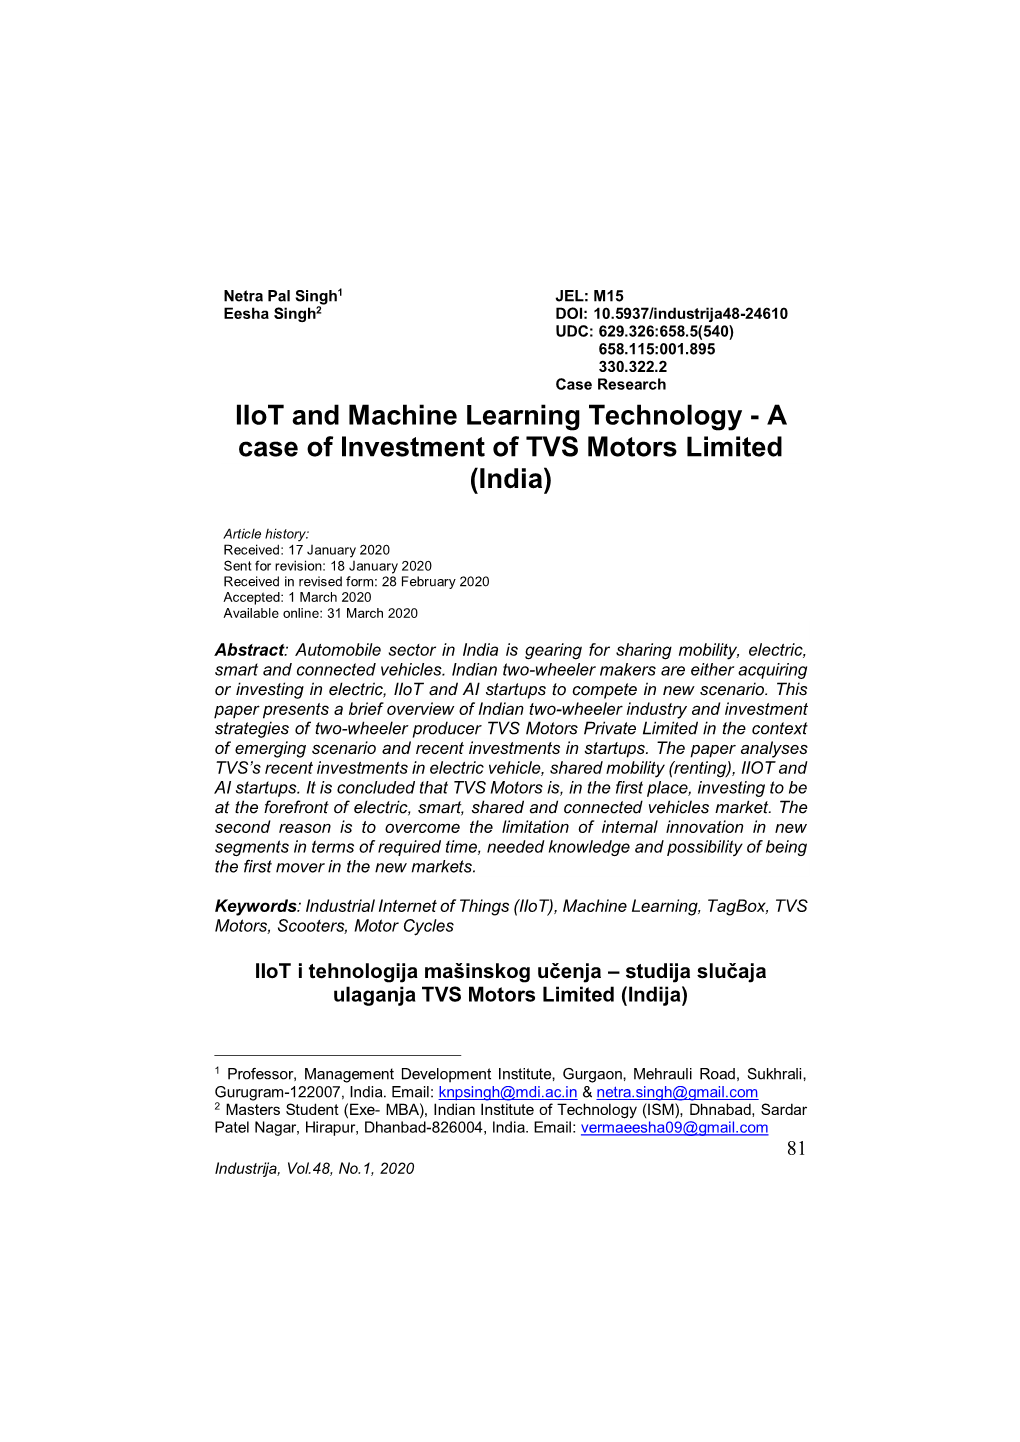 Iiot and Machine Learning Technology - a Case of Investment of TVS Motors Limited (India)